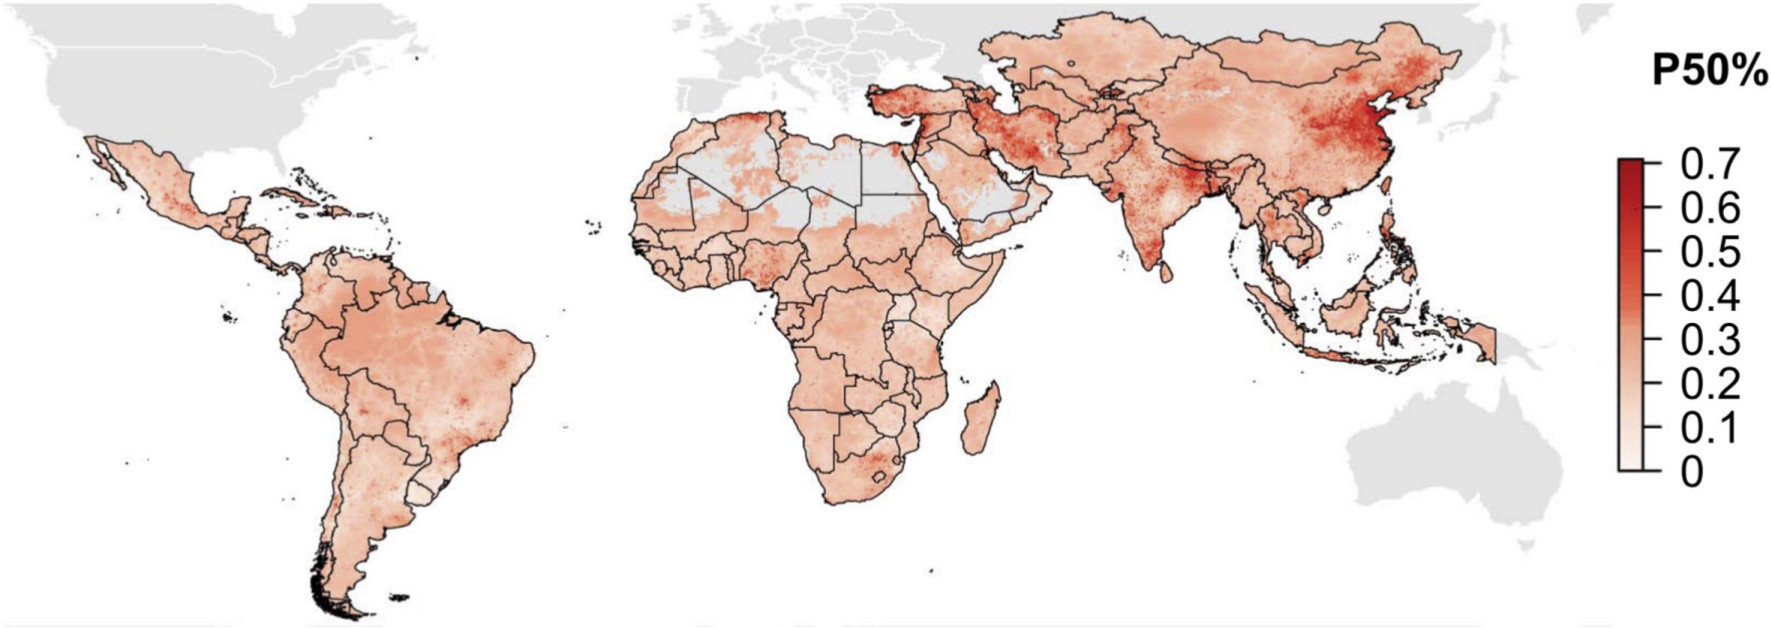 Fig. 8 
            World map on antibiotic resistance from van Boeckel et al71. This map emphasizes P50, the proportion of bactericidal antibiotics which have a resistance above 50%. Only low- and middle-income countries are reported here. Image is reproduced from van Boeckel et al with permission.71
          